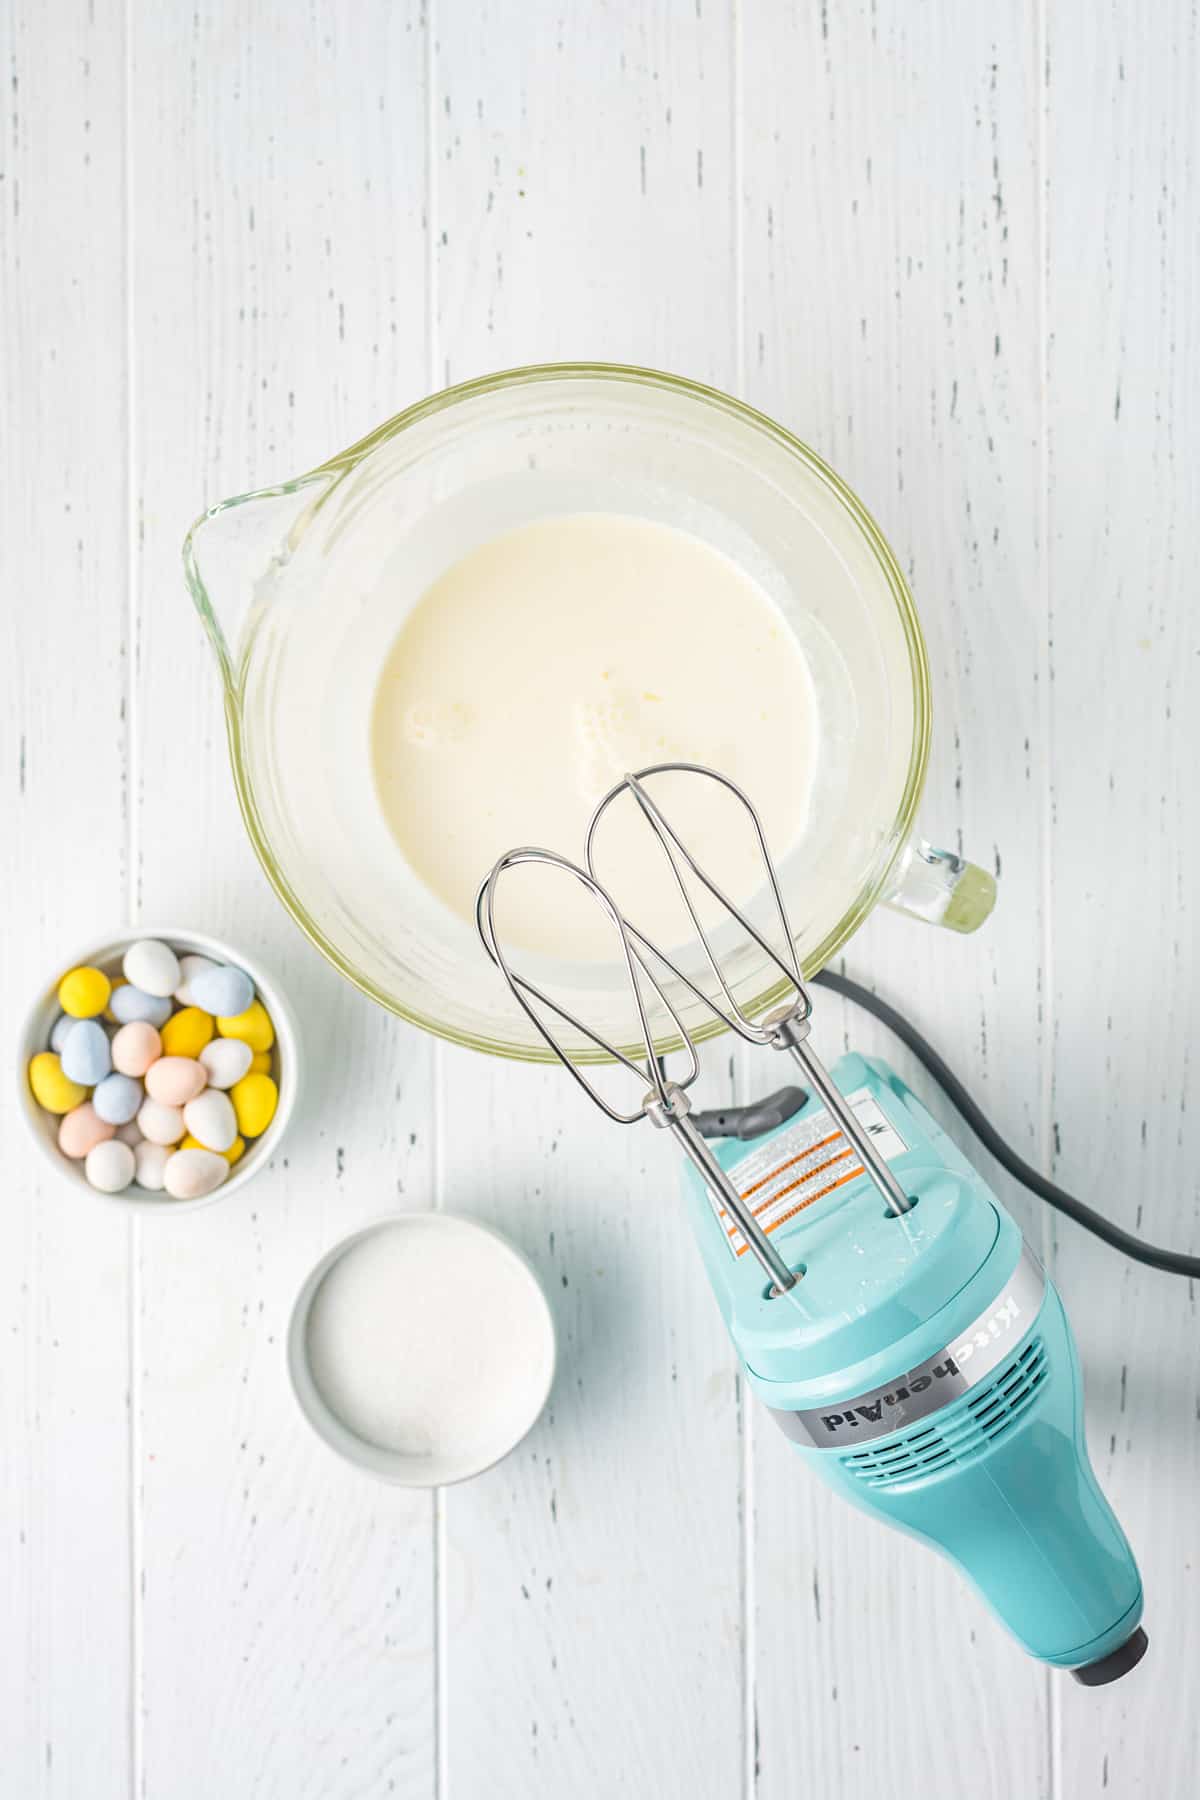 Making whipped cream filling in large glass mixing bowl with hand mixer.